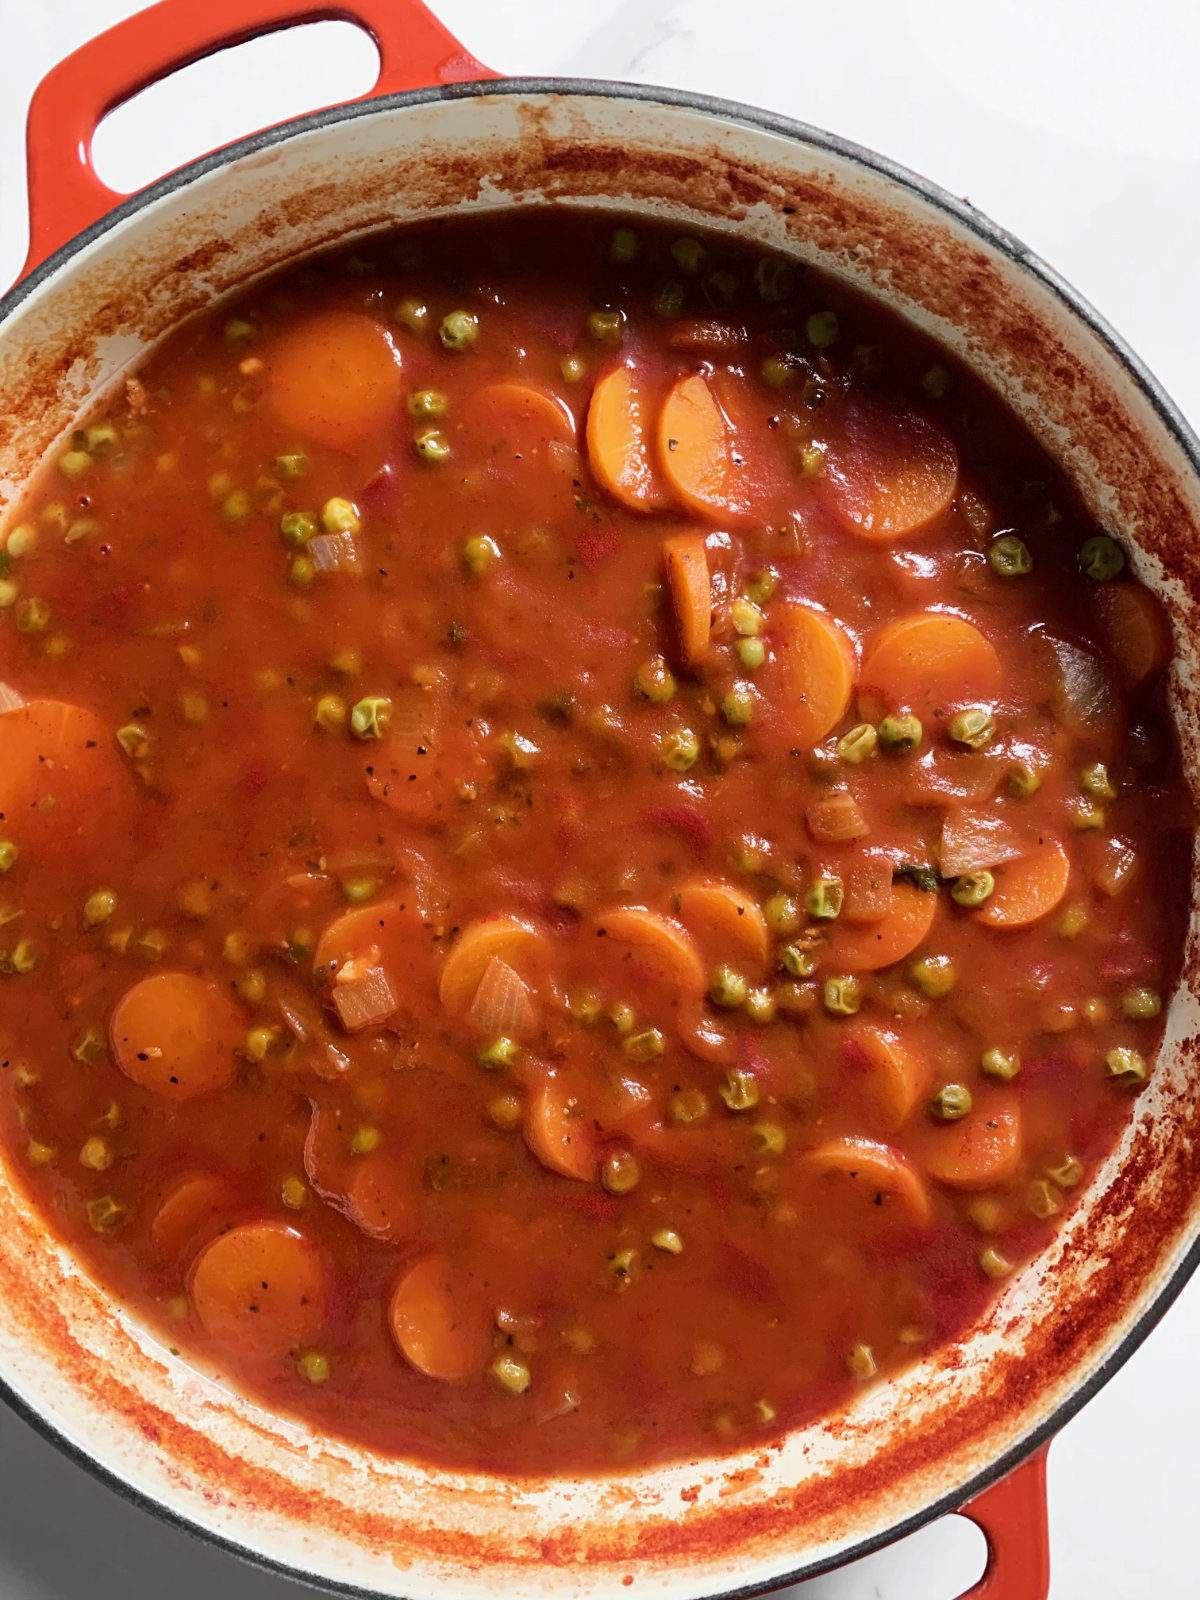 stewed peas and carrots in red sauce in a red casserole dish